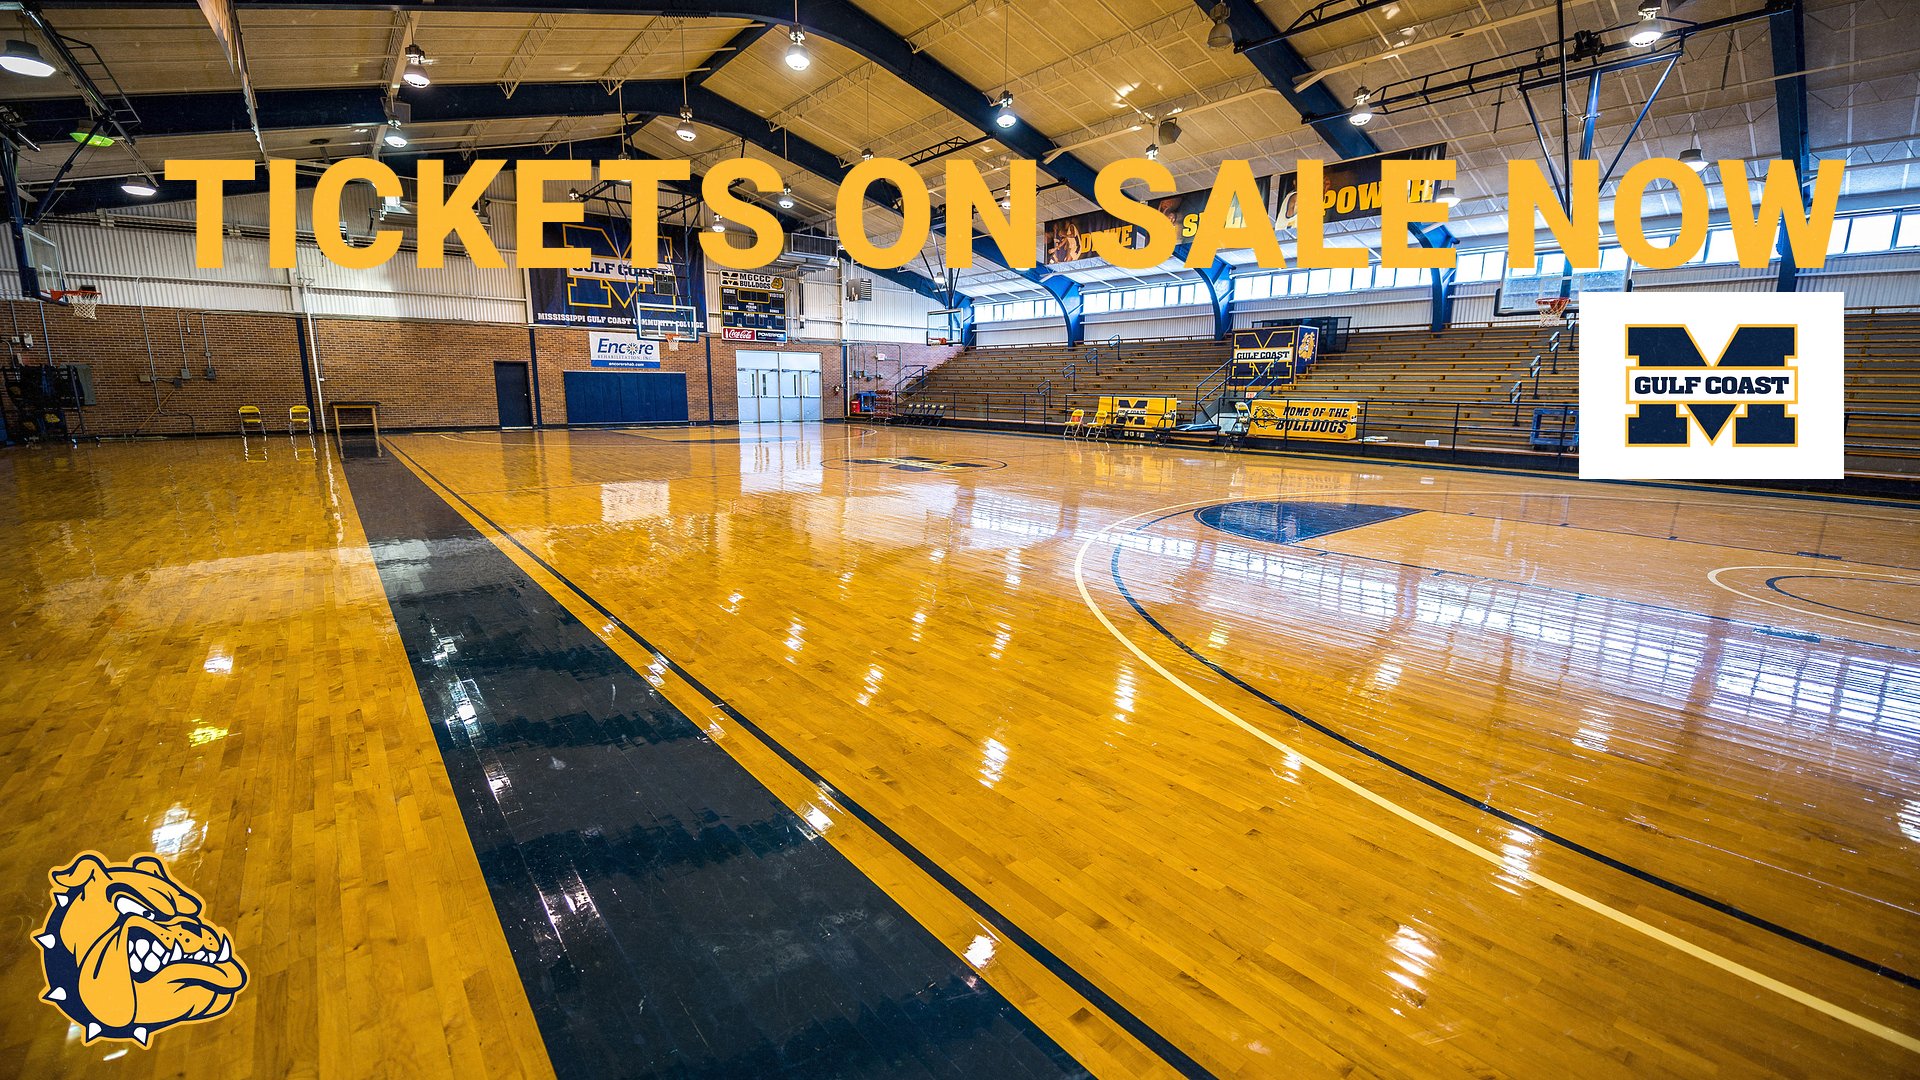 Basketball tickets on sale now